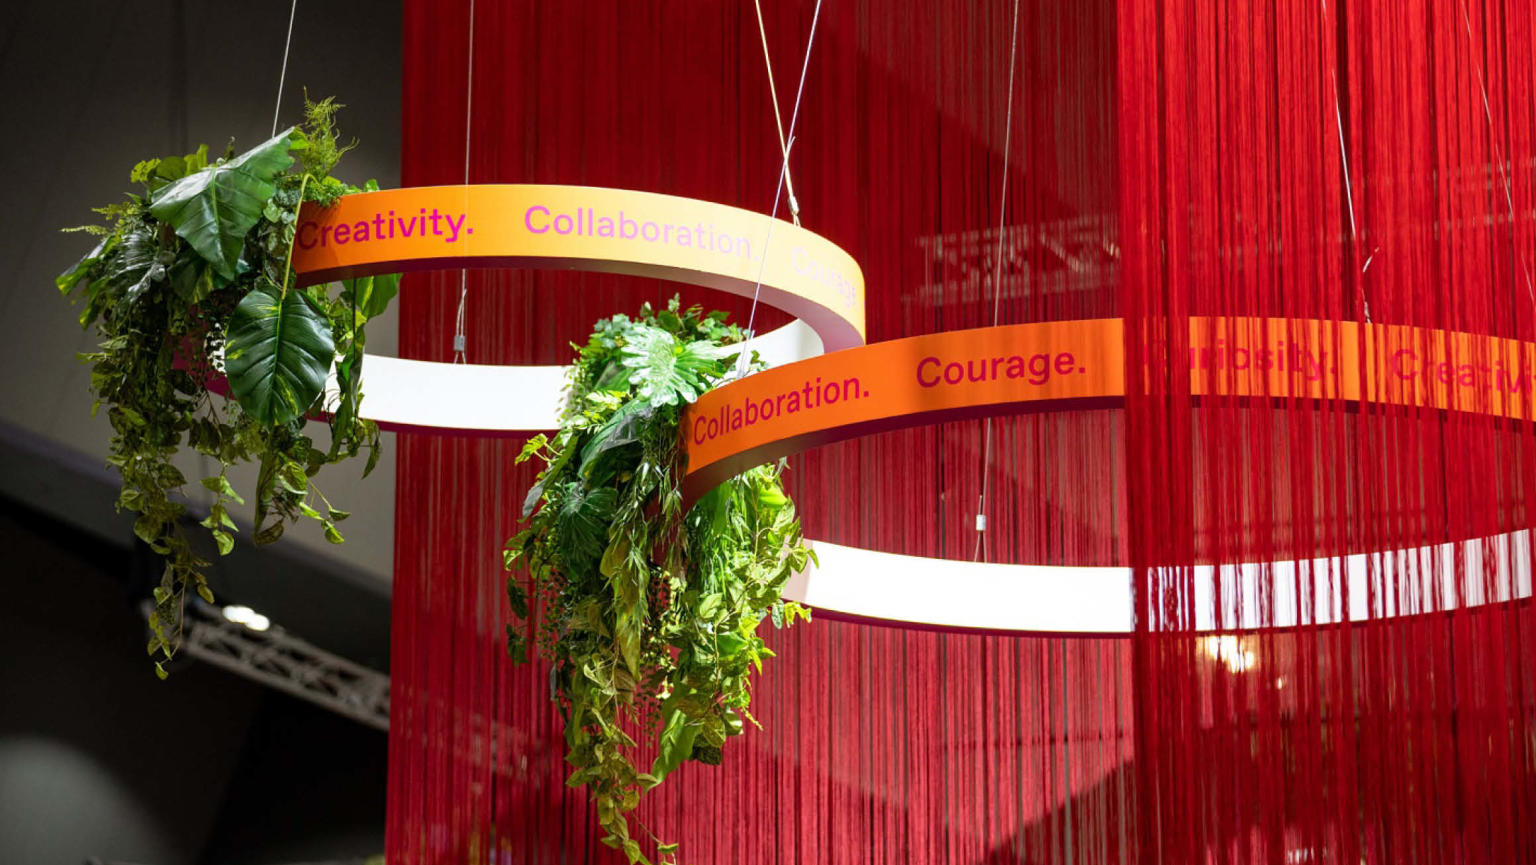 A close-up view of vibrant long red fringing with two hollow circle bands at the centre. The bands are adorned with the inspiring words 'Creativity, Collaboration, Courage, and Curiosity' and embellished with hanging greenery.